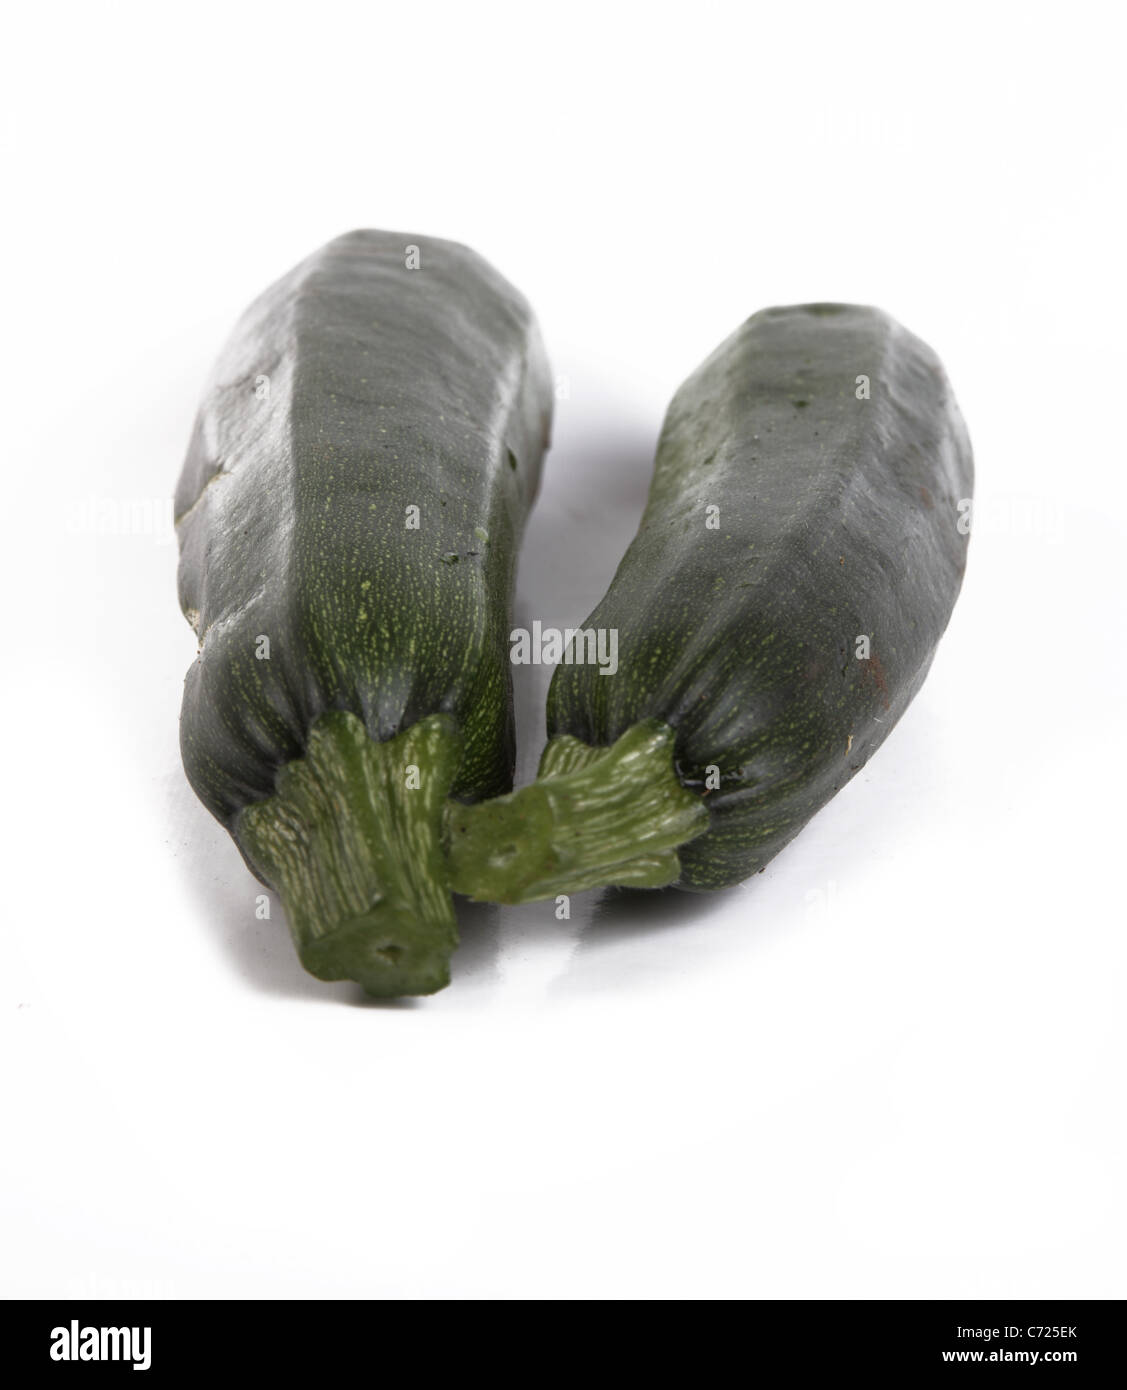 Allotment Grown Courgettes on White Background Stock Photo